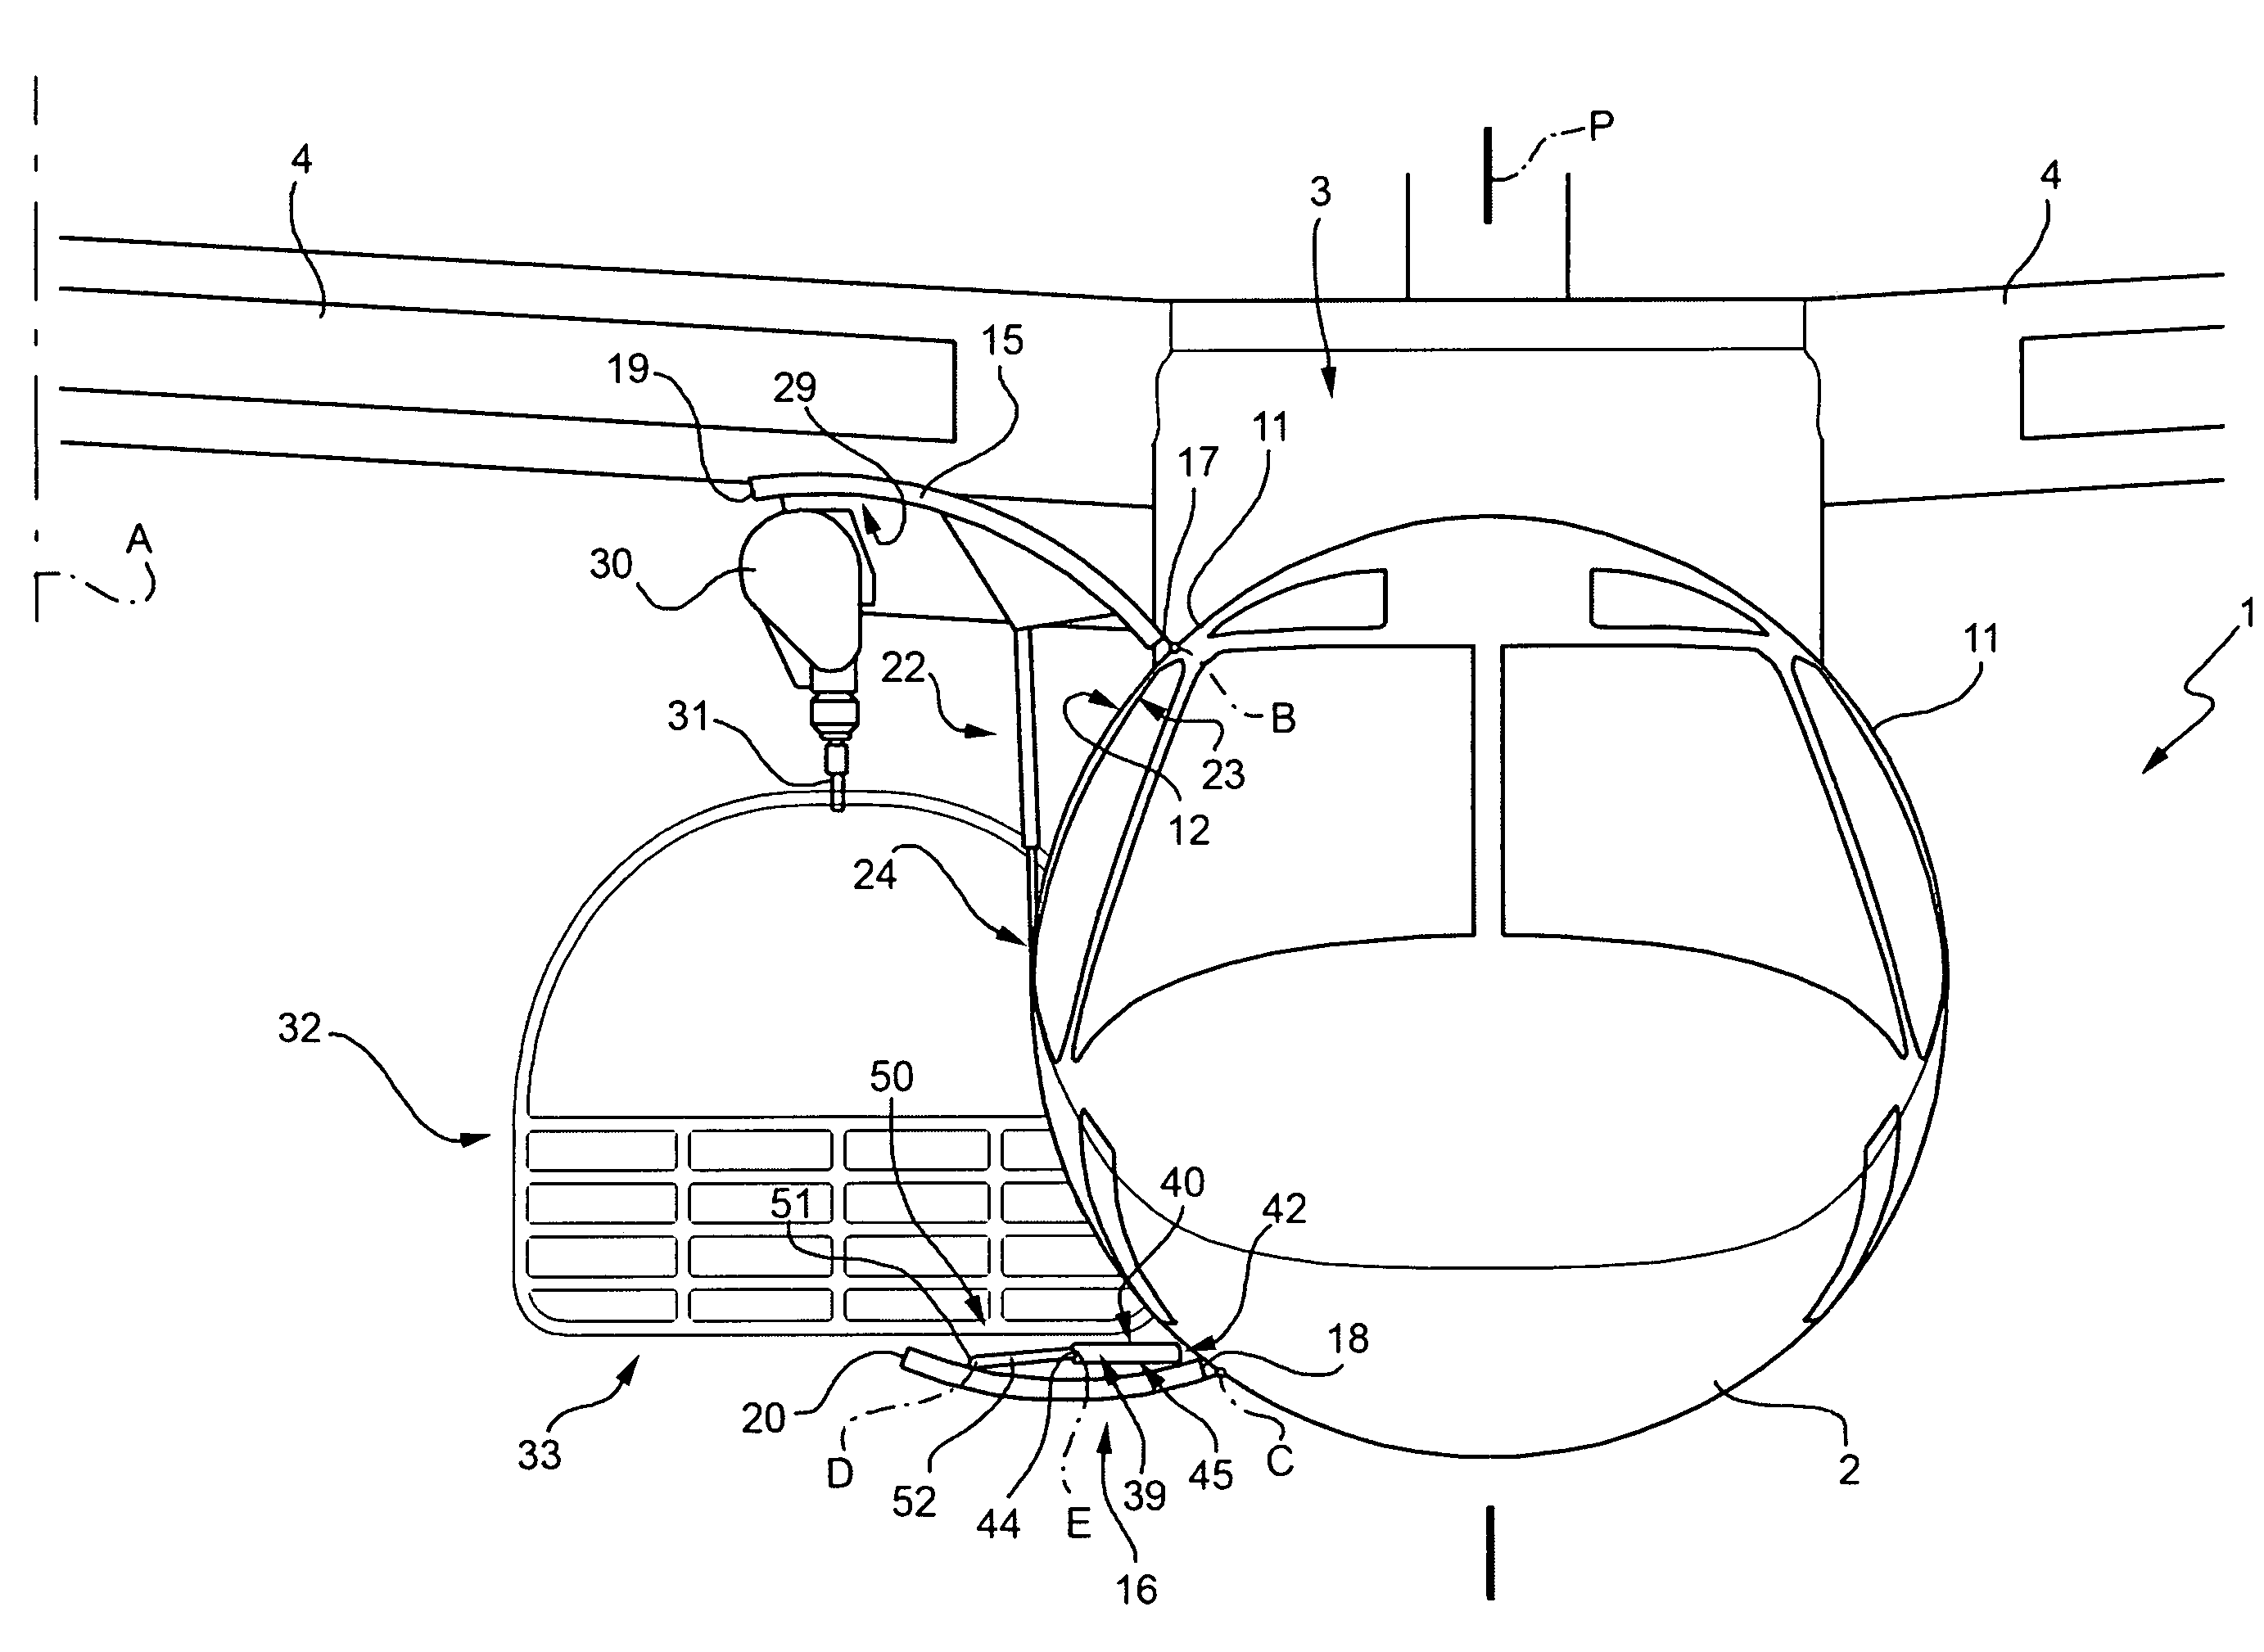 Aircraft and method of retrieving a rescue cradle into the aircraft fuselage